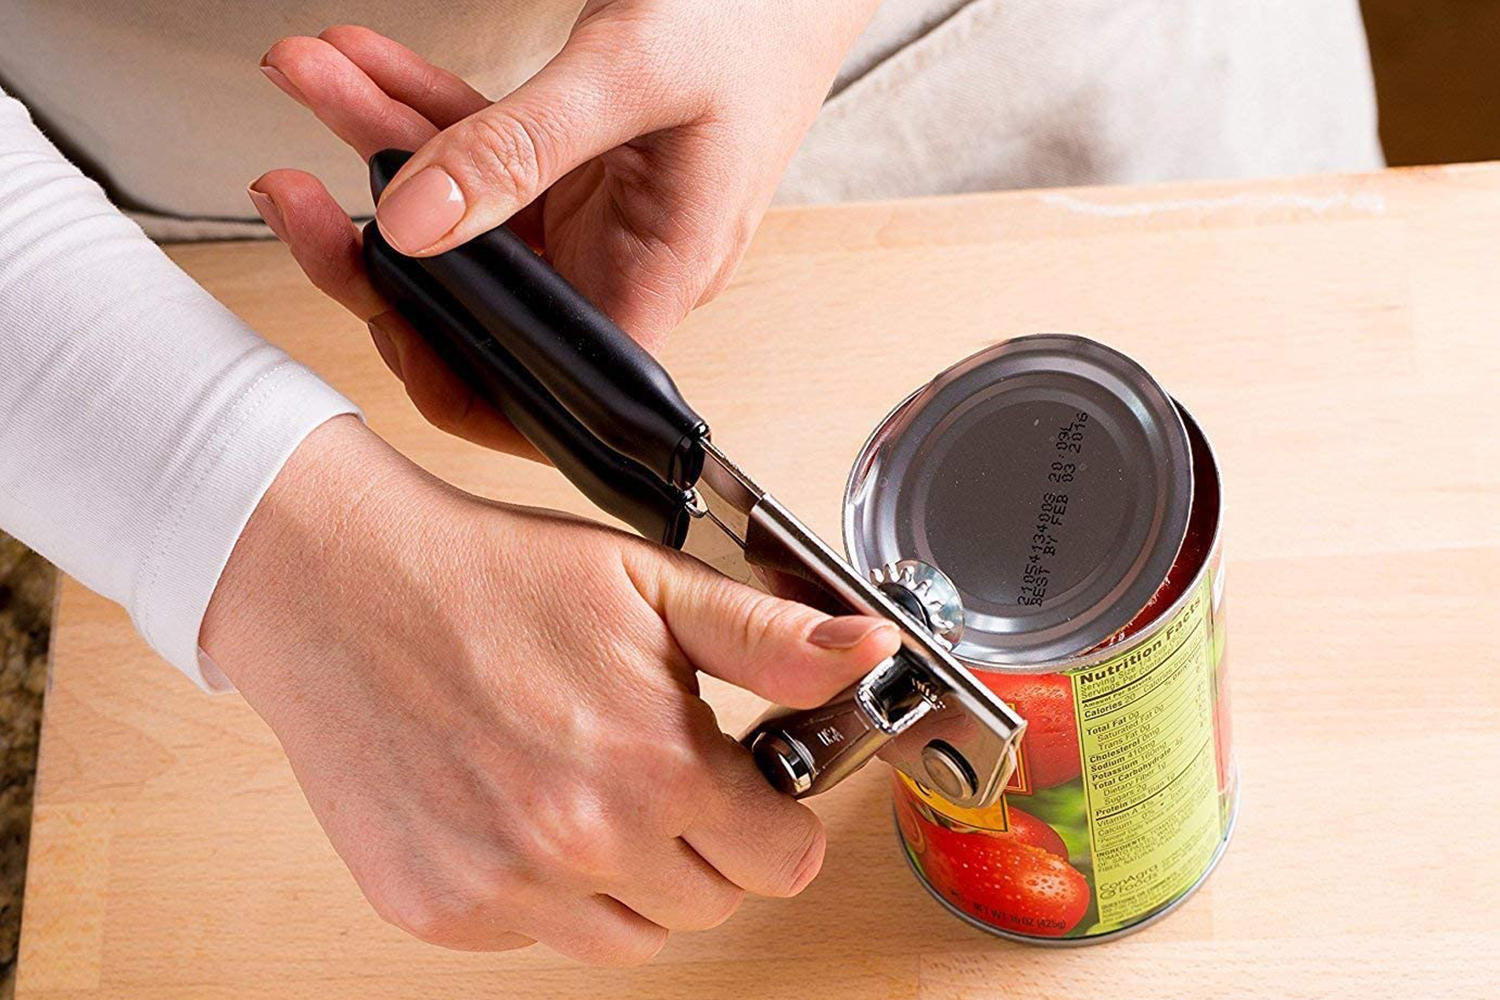 https://www.themanual.com/wp-content/uploads/sites/9/2021/03/made-in-usa-can-opener.jpg?fit=800%2C533&p=1